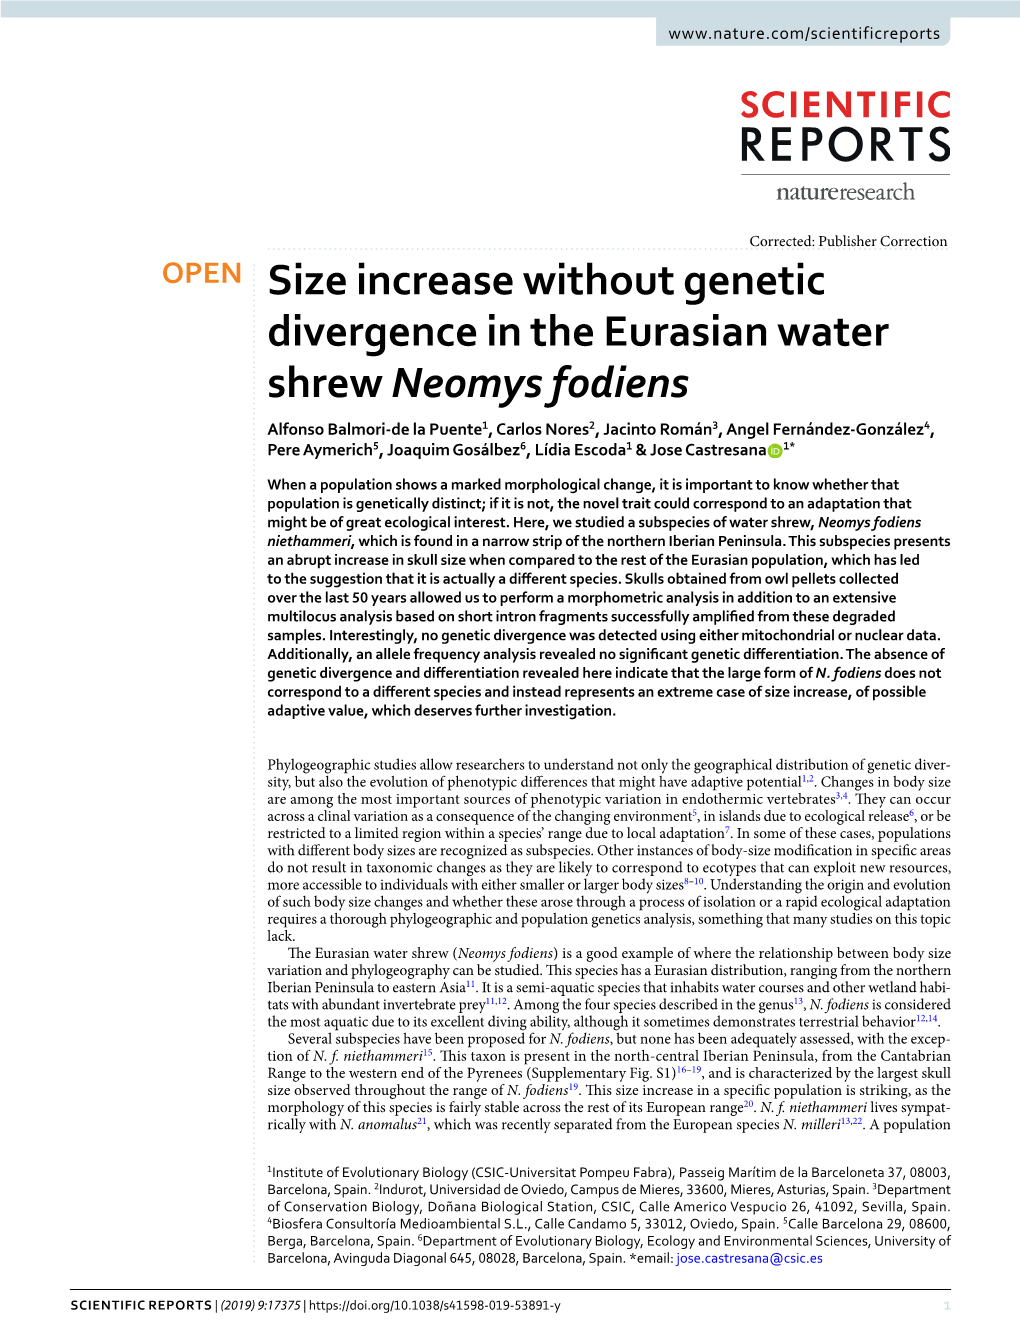 Size Increase Without Genetic Divergence in the Eurasian Water